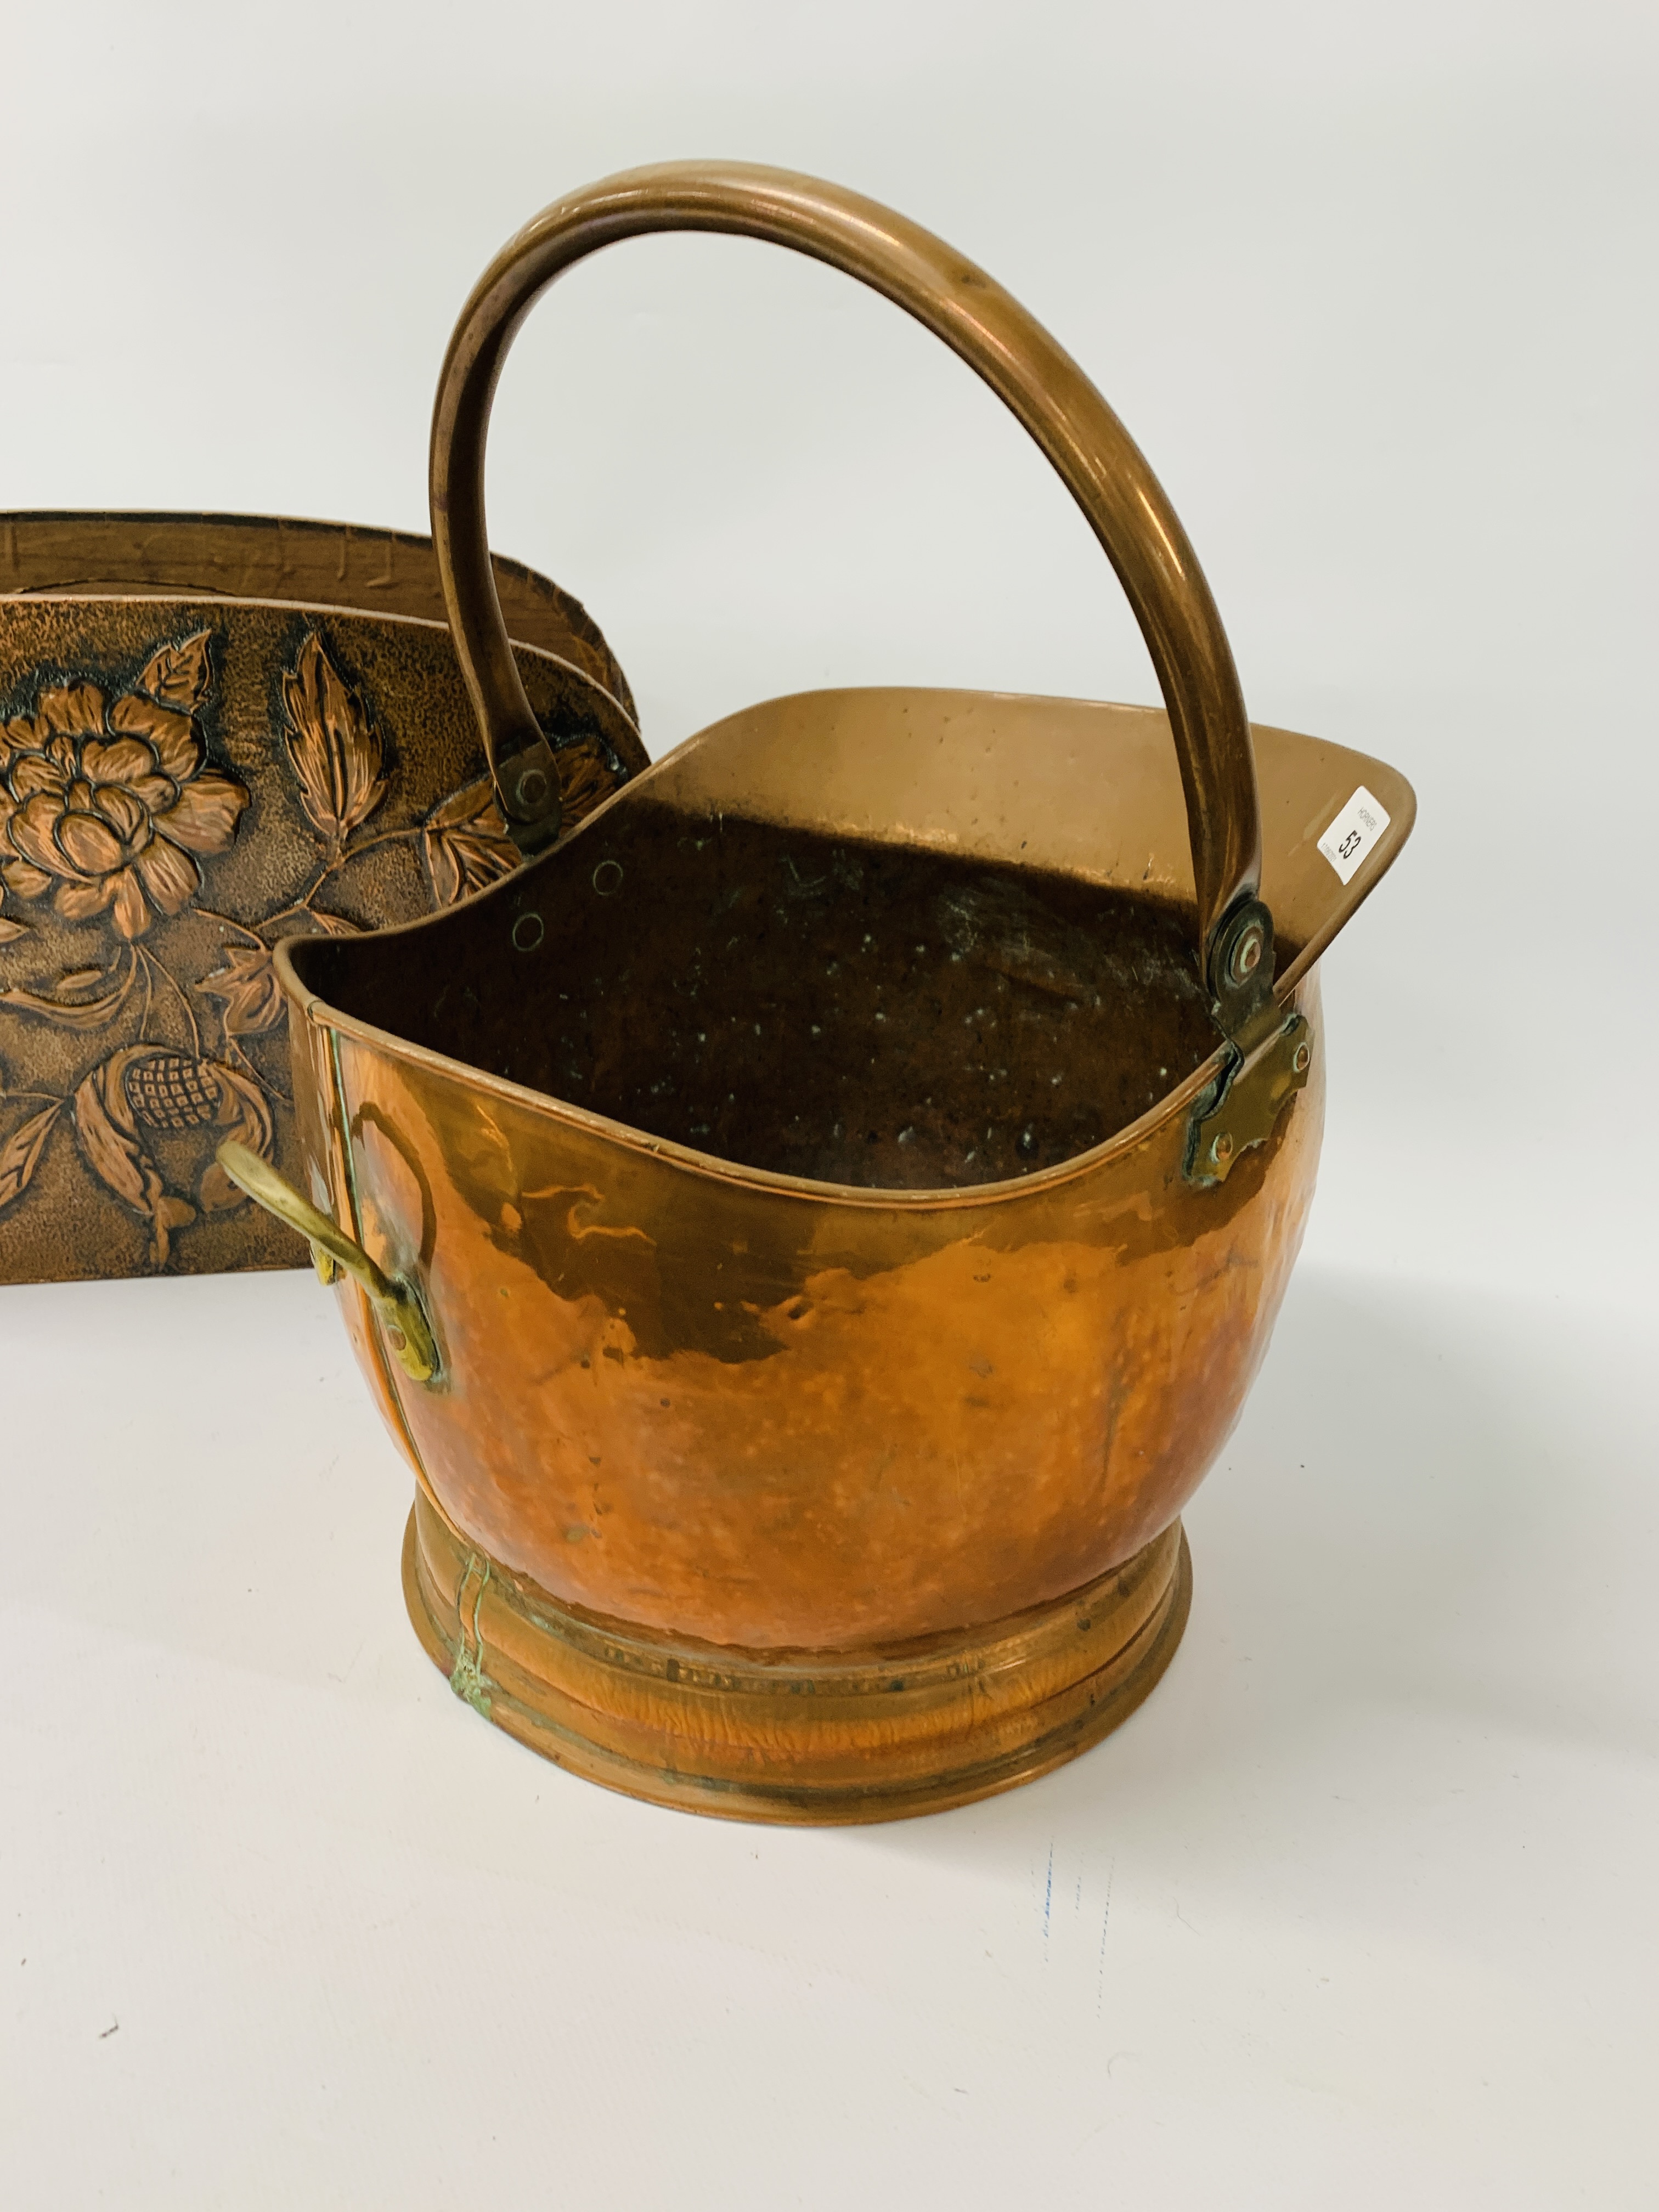 VINTAGE COPPER COAL BUCKET ALONG WITH A VINTAGE MAGAZINE RACK WITH FLORAL COPPER EMBOSSED DETAIL - Image 4 of 5